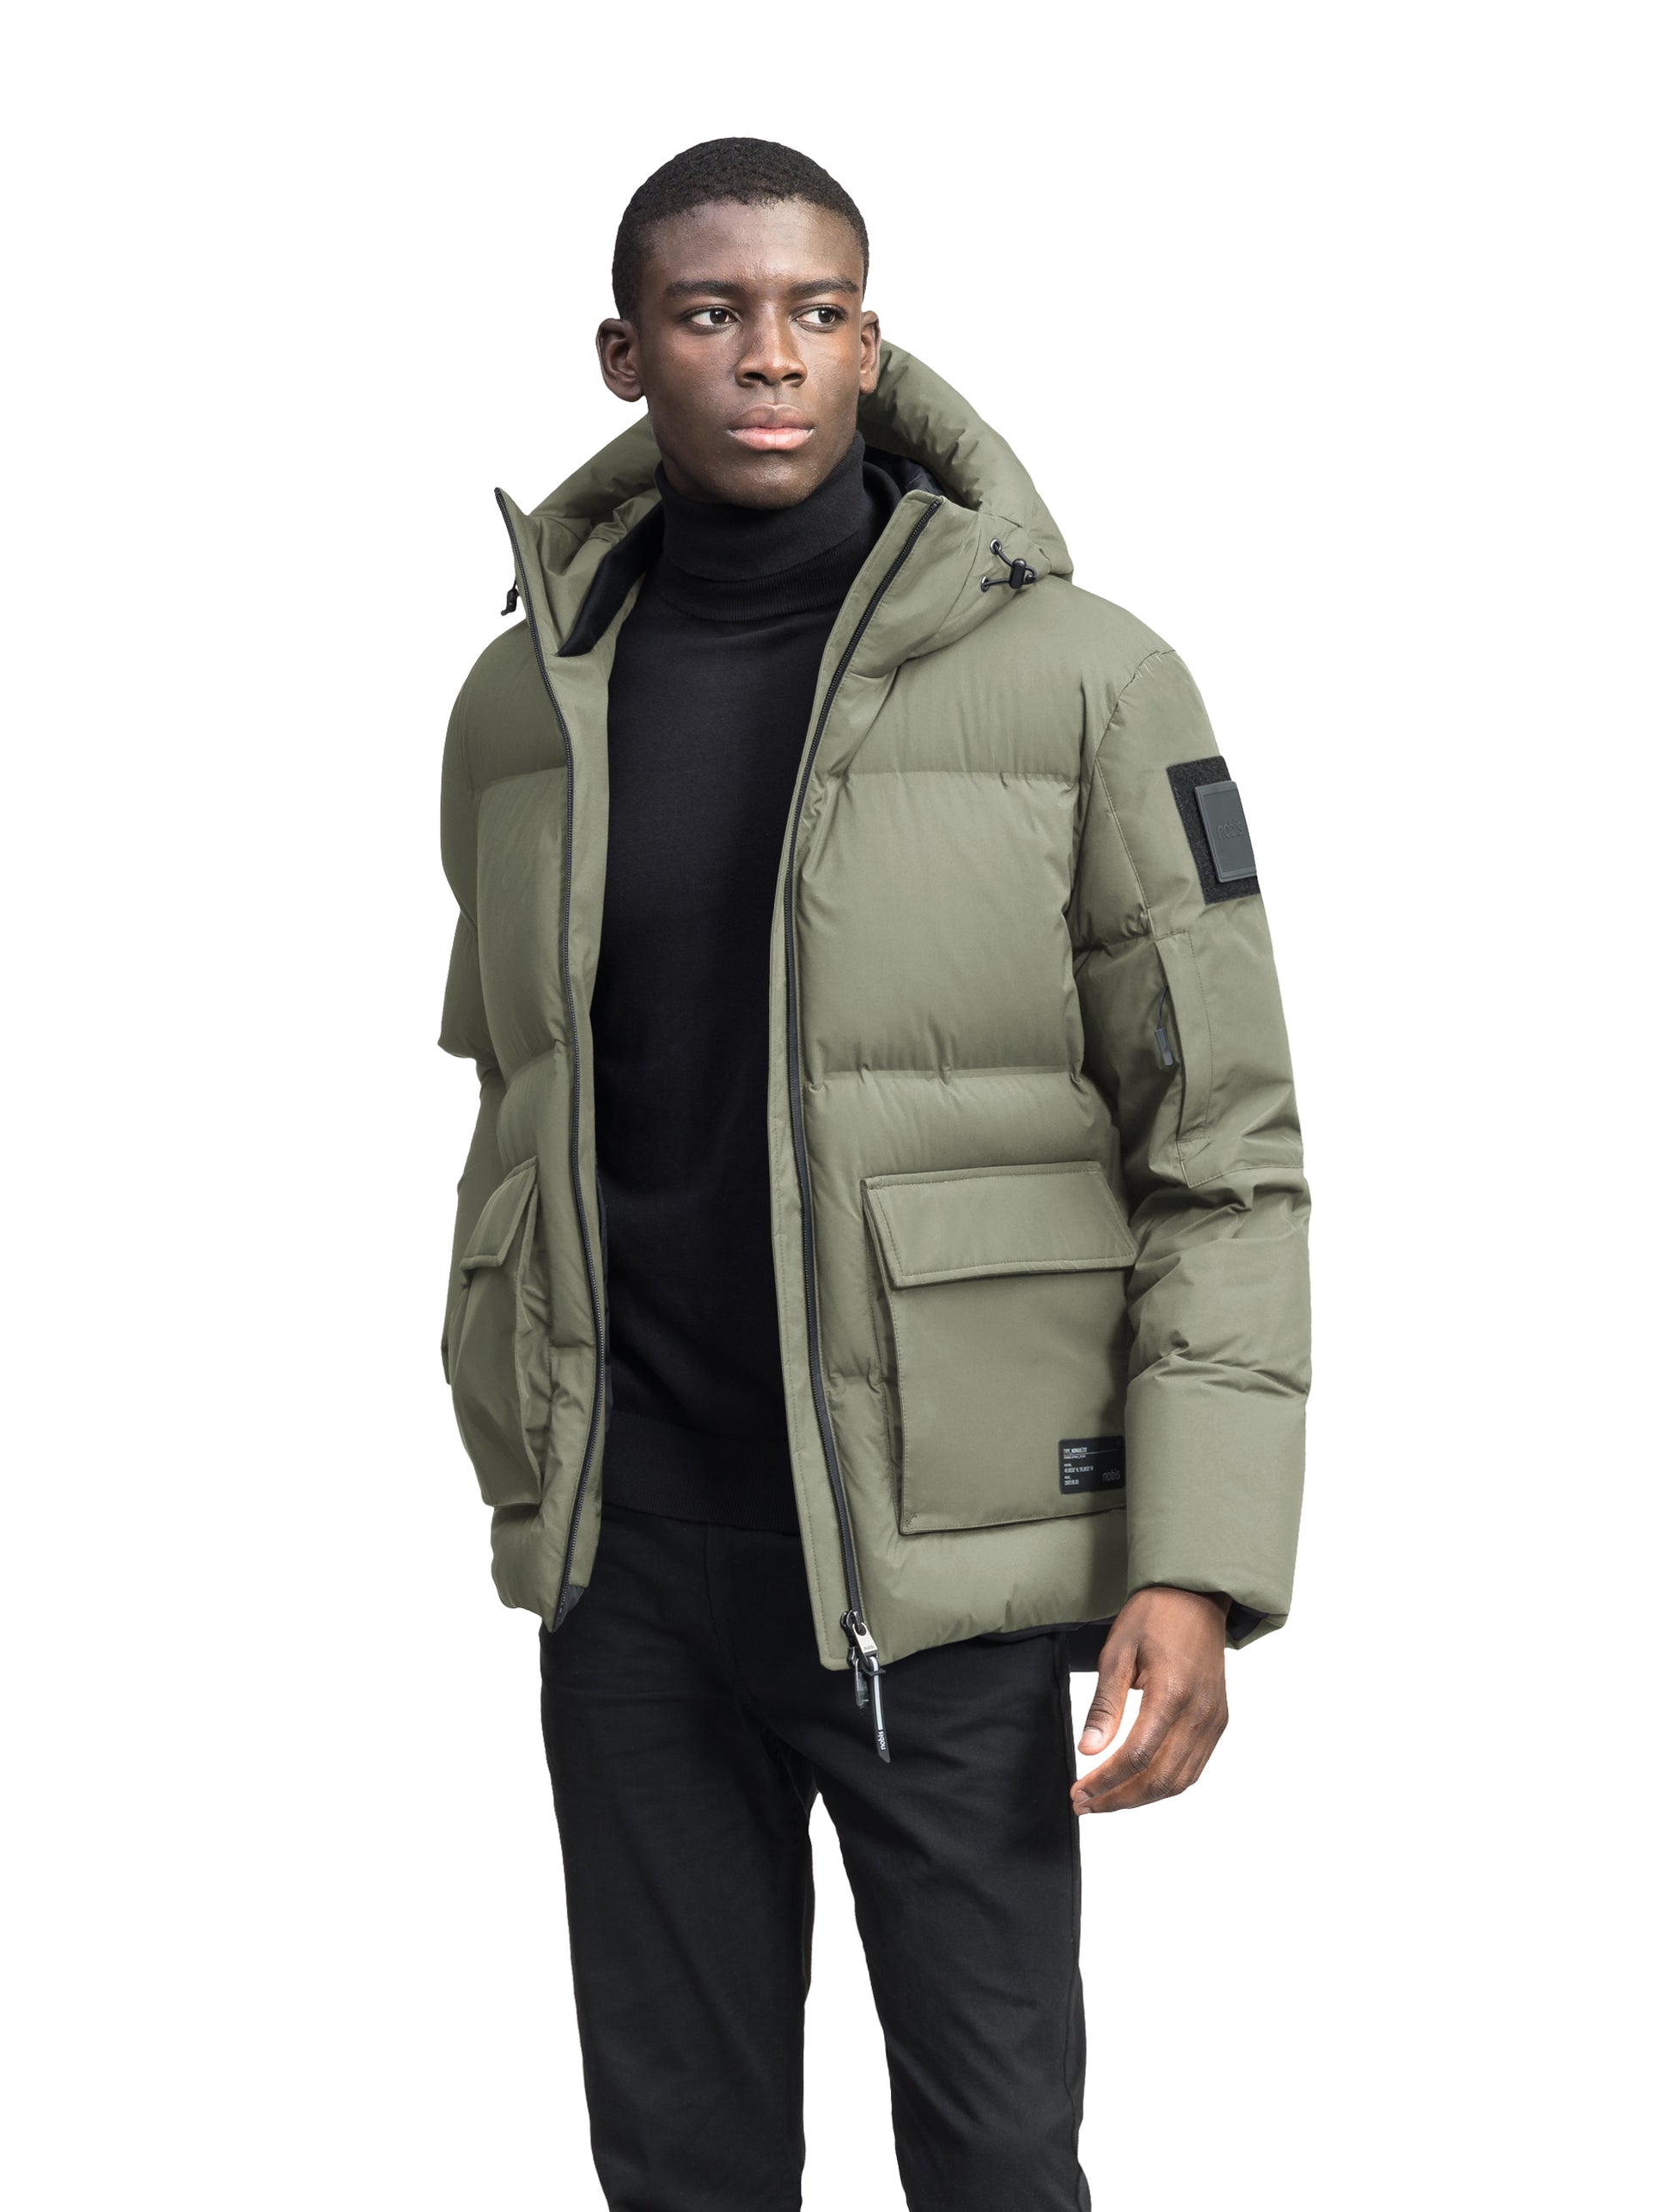 Supra Men's Performance Puffer in hip length, Technical Taffeta and 3-Ply Micro Denier fabrication, Premium Canadian White Duck Down insulation, non-removable down filled hood, centre front two-way zipper, flap pockets at waist, and zipper pocket at left bicep, in Clove